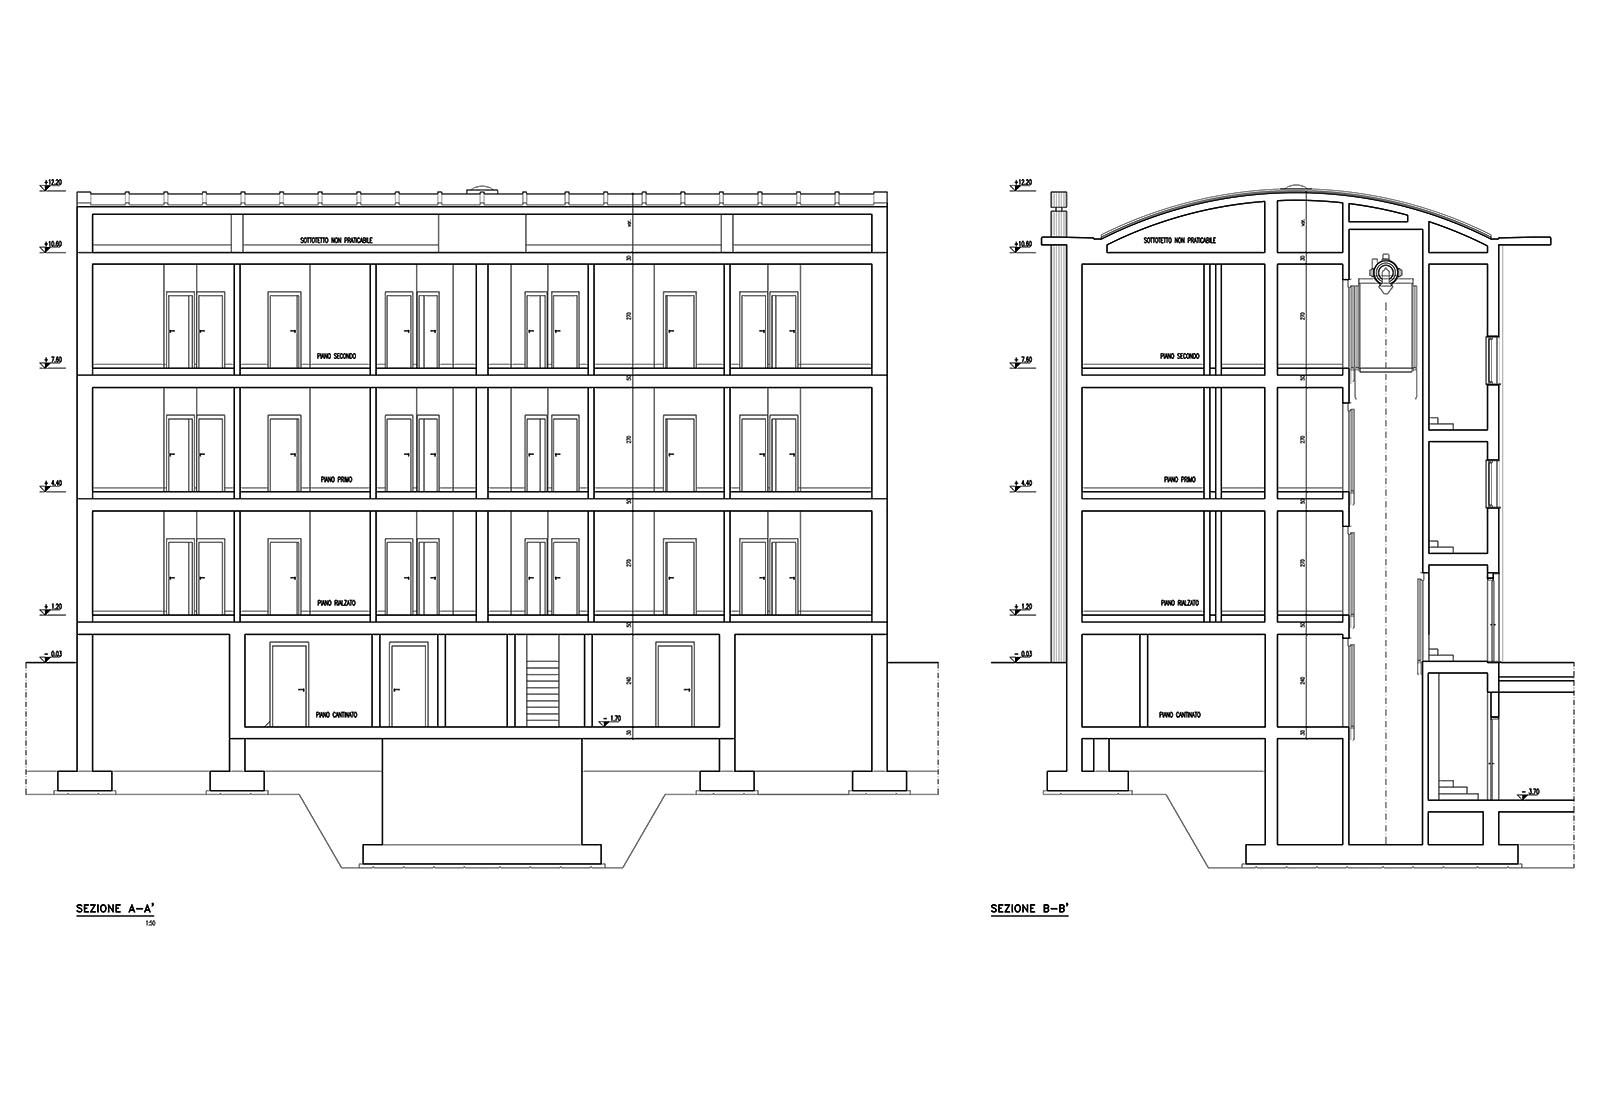 Residential ensemble in Macherio - Type B building - Sections